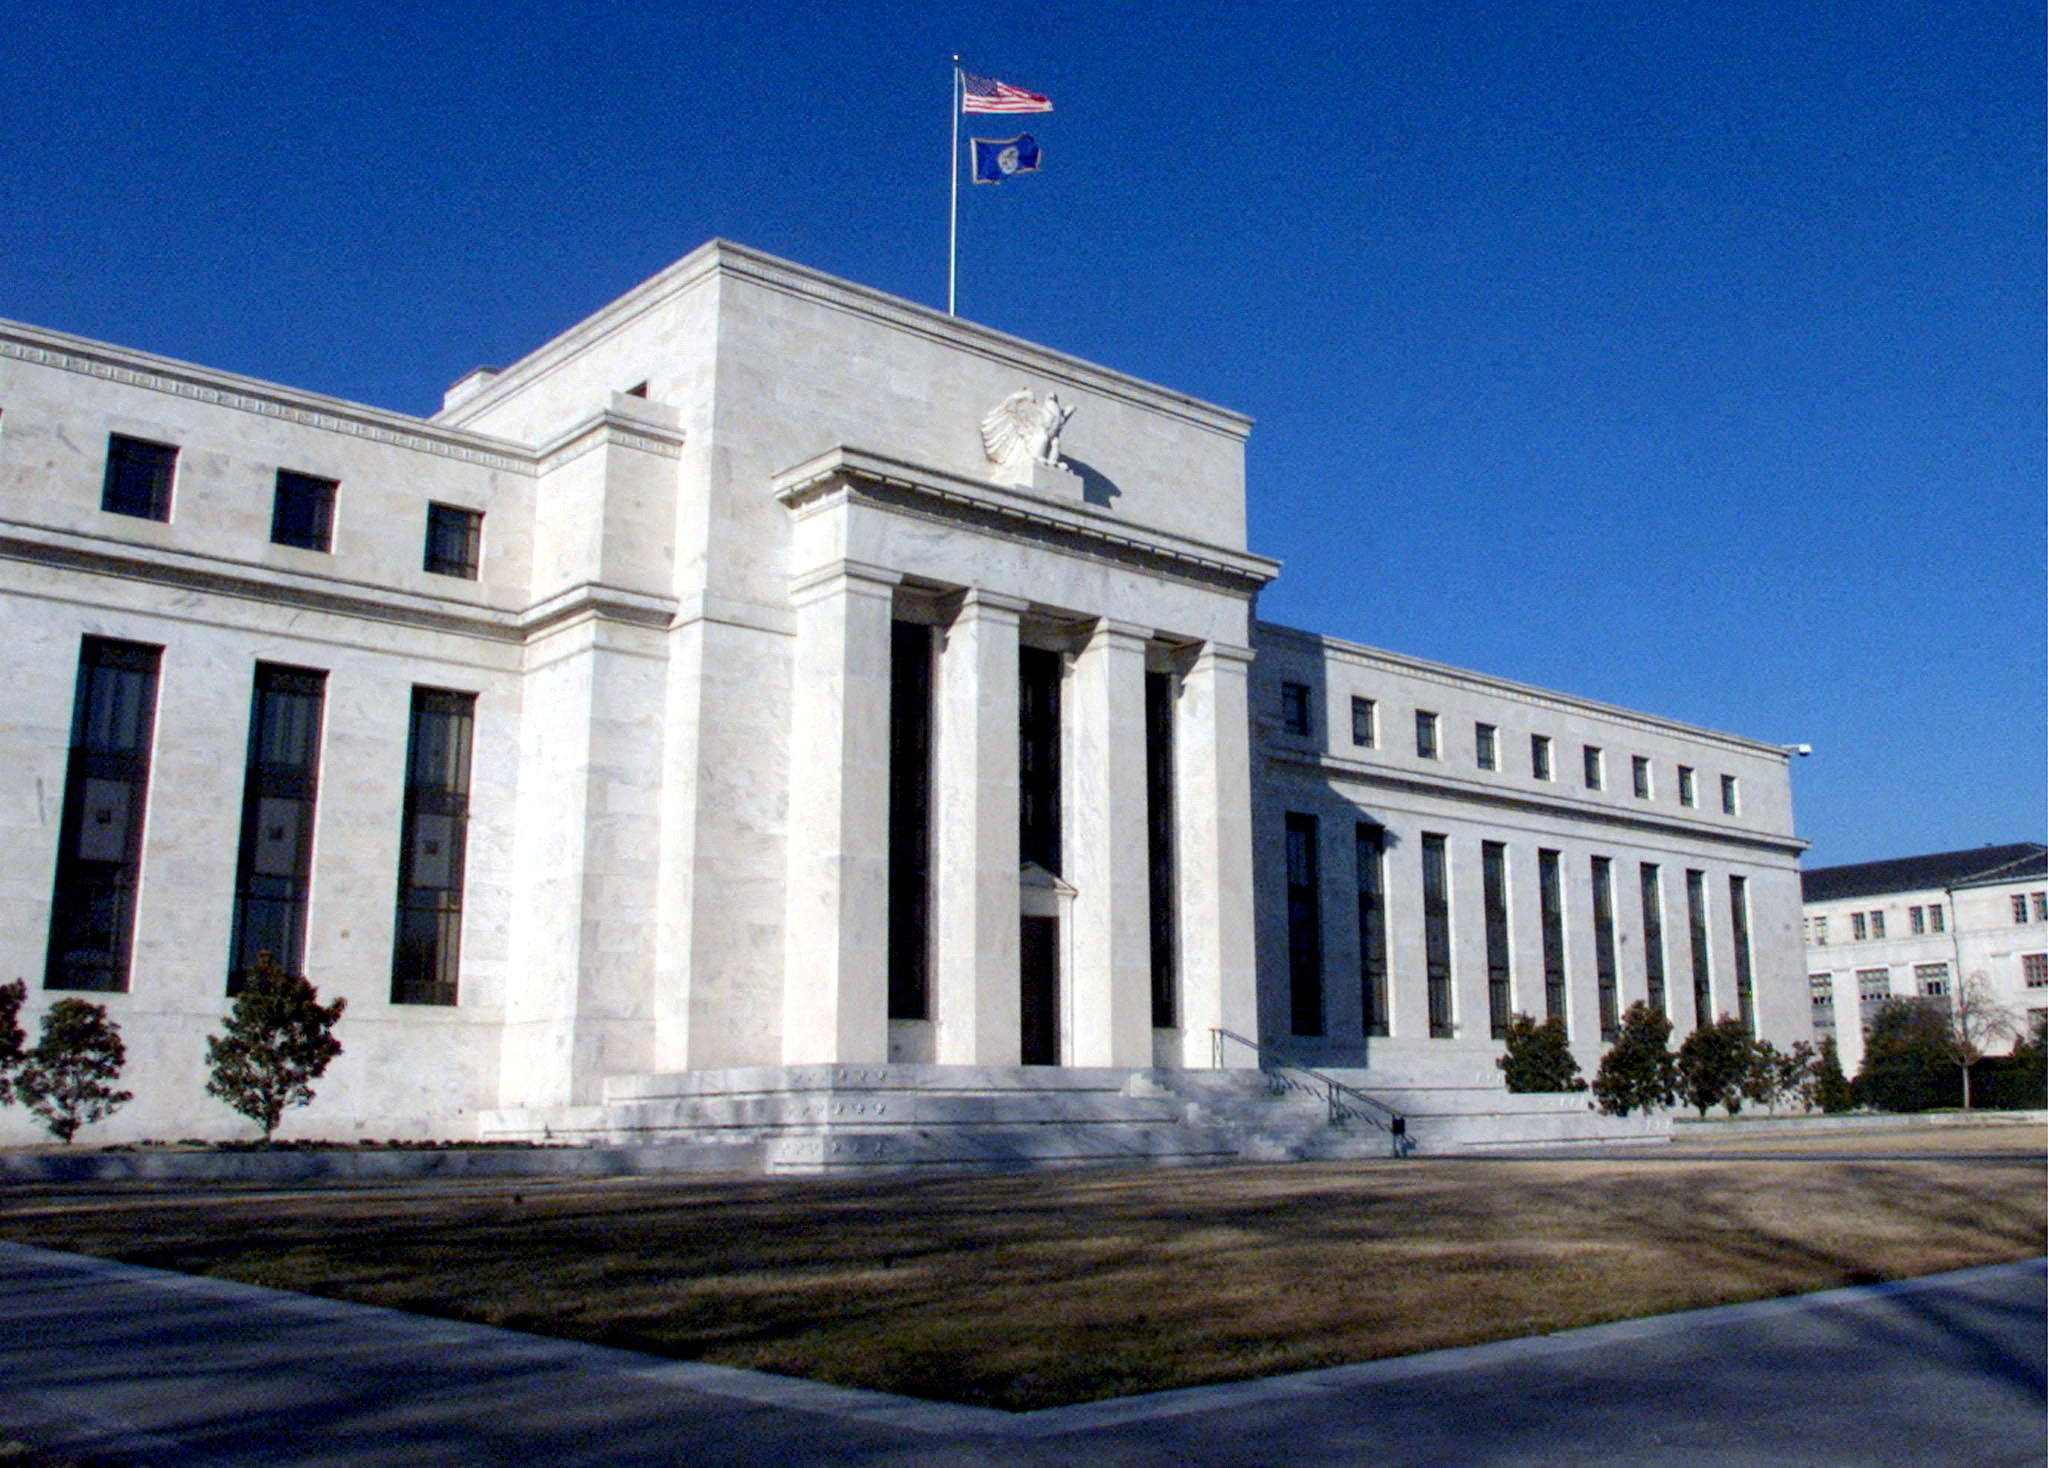 The U.S. Federal Reserve building in Washington, D.C.